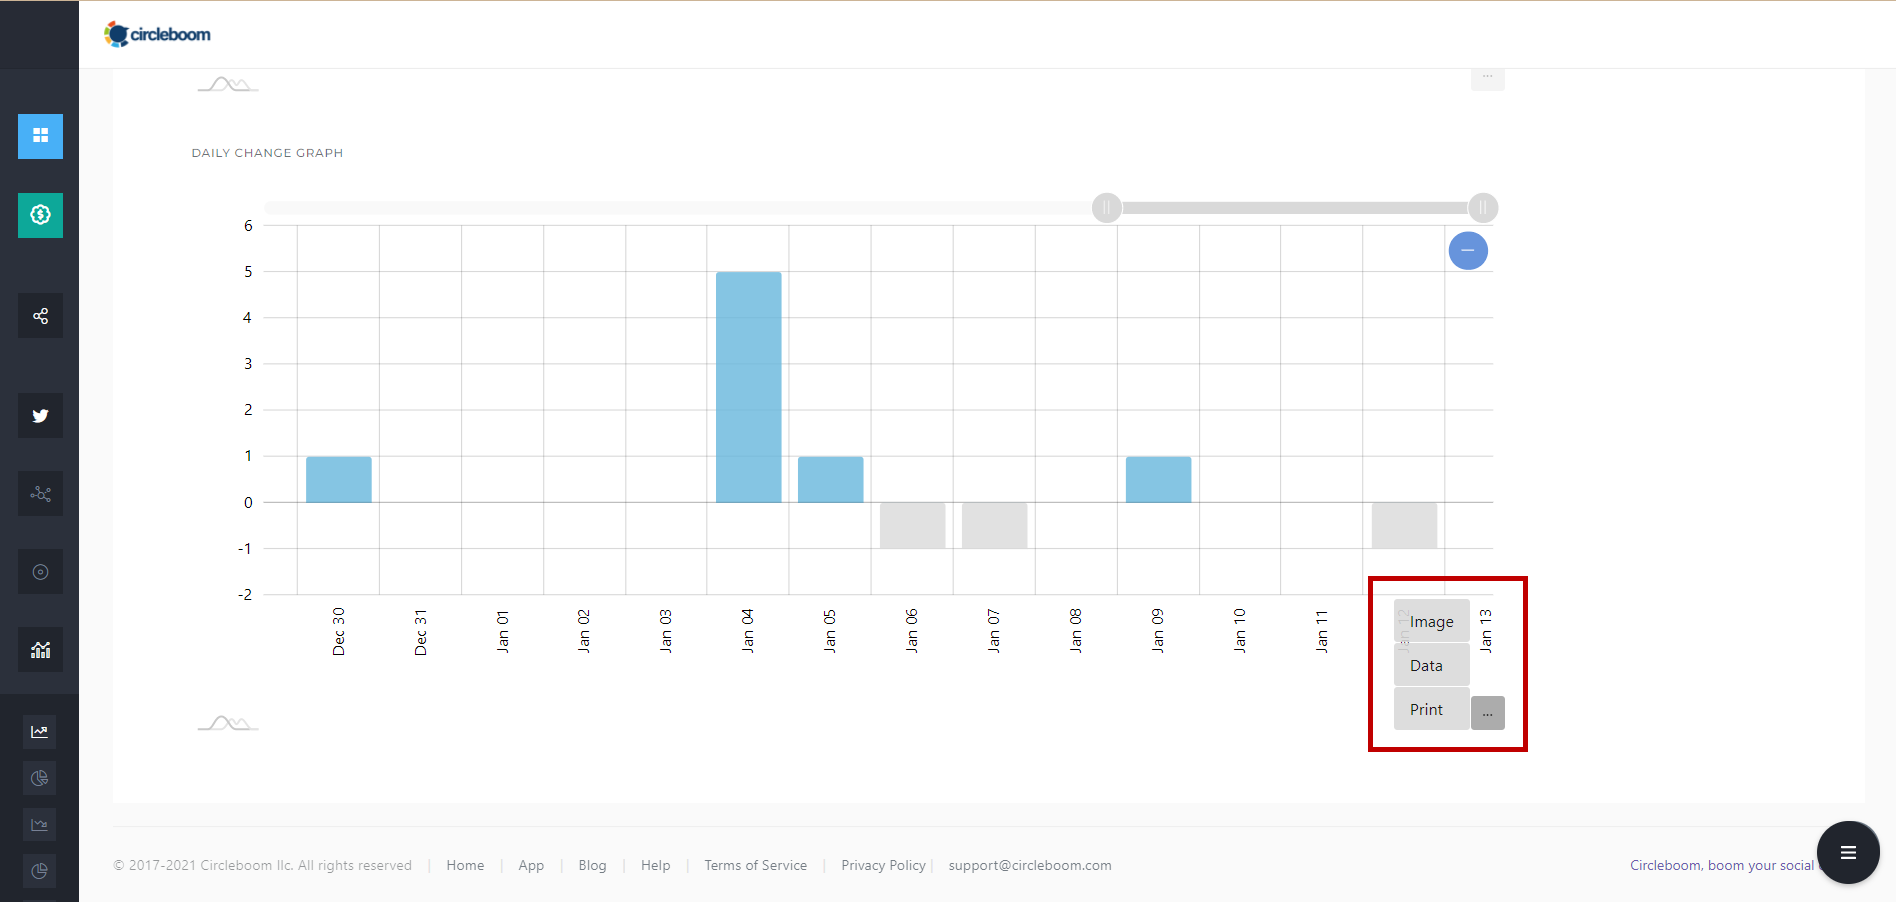 Export your Twitter user analytics as an image or data.